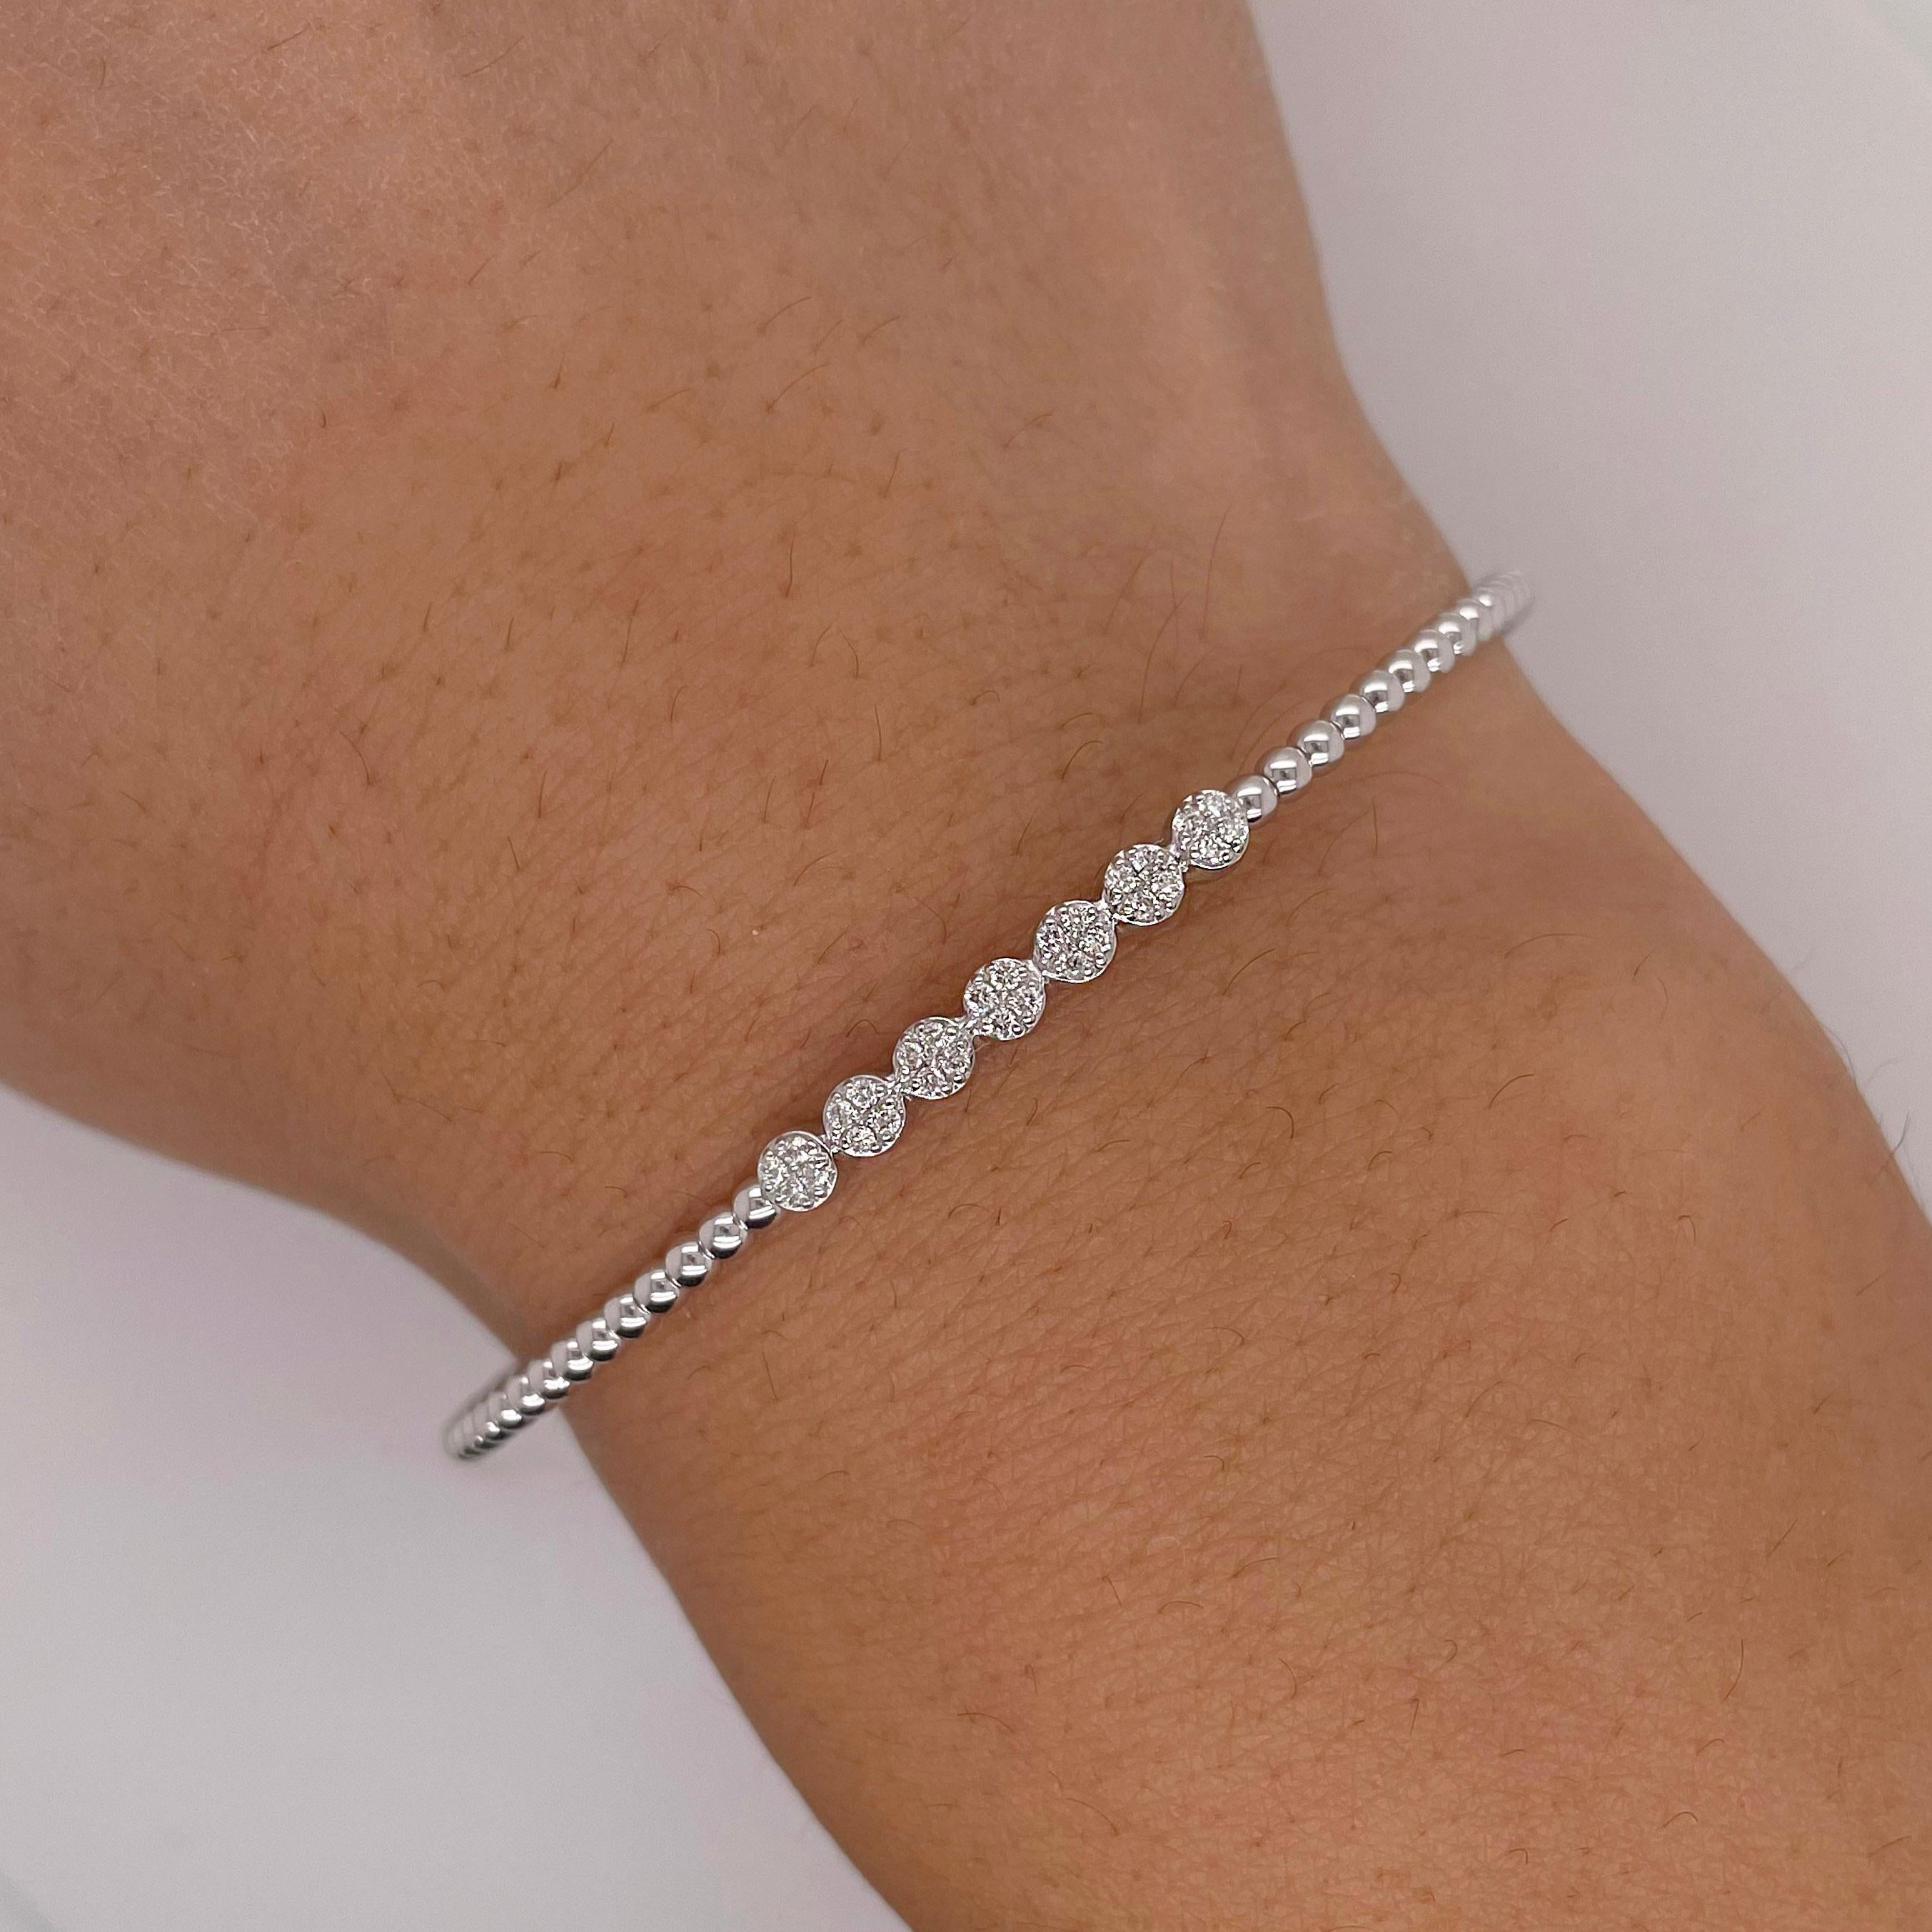 Round Cut Bead Cuff Bracelet w Cluster Diamond Stations, White Gold, Flexible Bangle For Sale